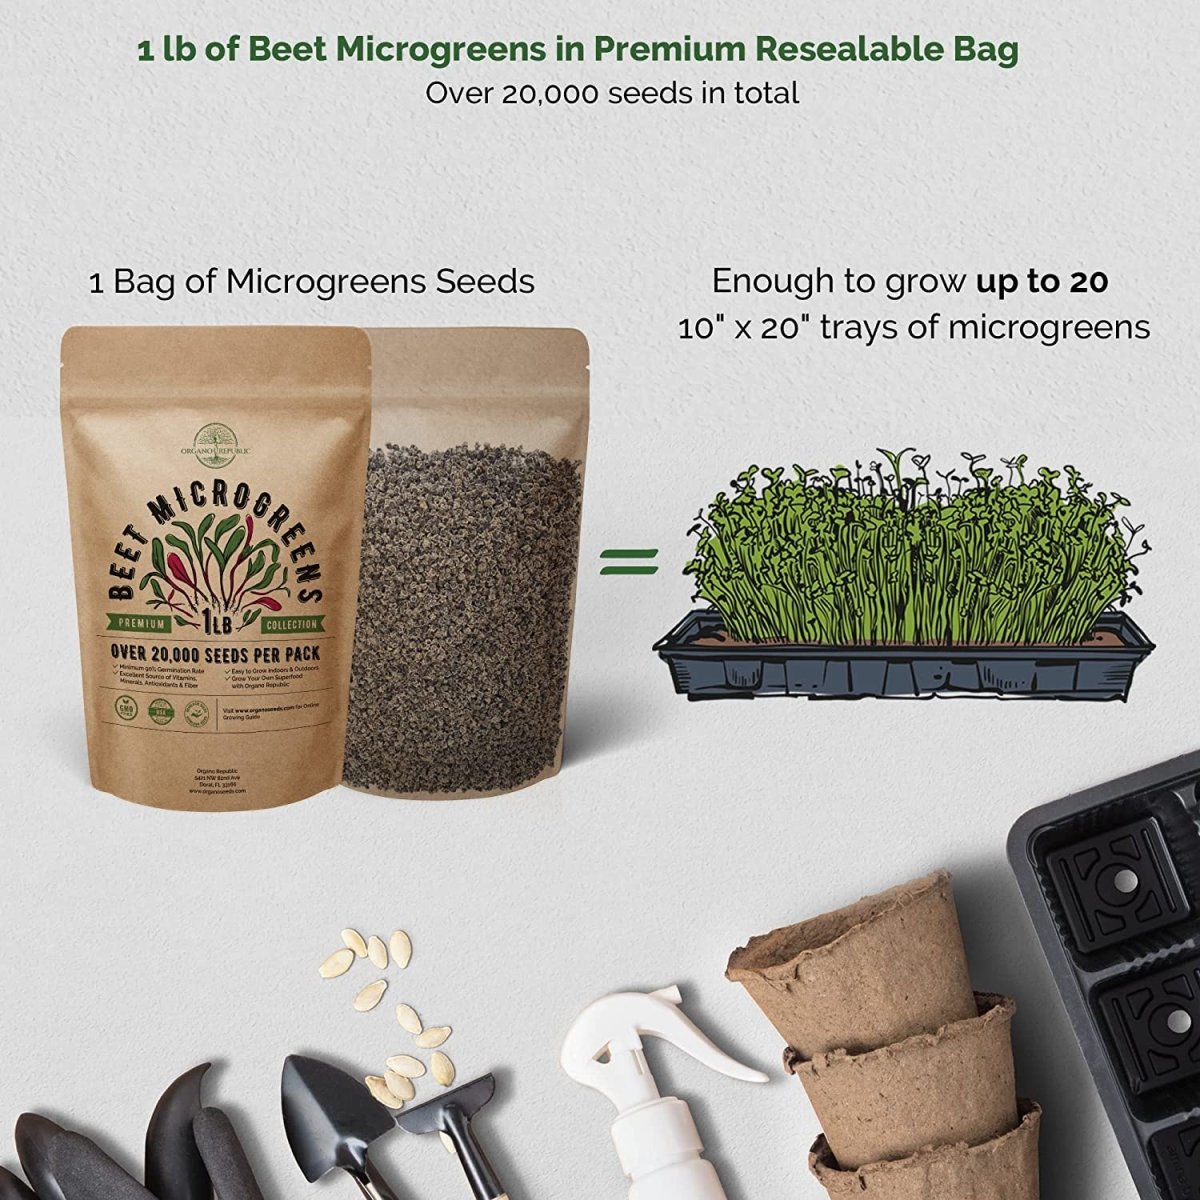 Beet Microgreens & 20 Most Popular Vegetables Seeds Bundle Non-GMO Heirloom Seeds for Planting Indoor and Outdoor Over 21,300 Microgreen & Vegetables Seeds in One Value Bundle - Organo Republic